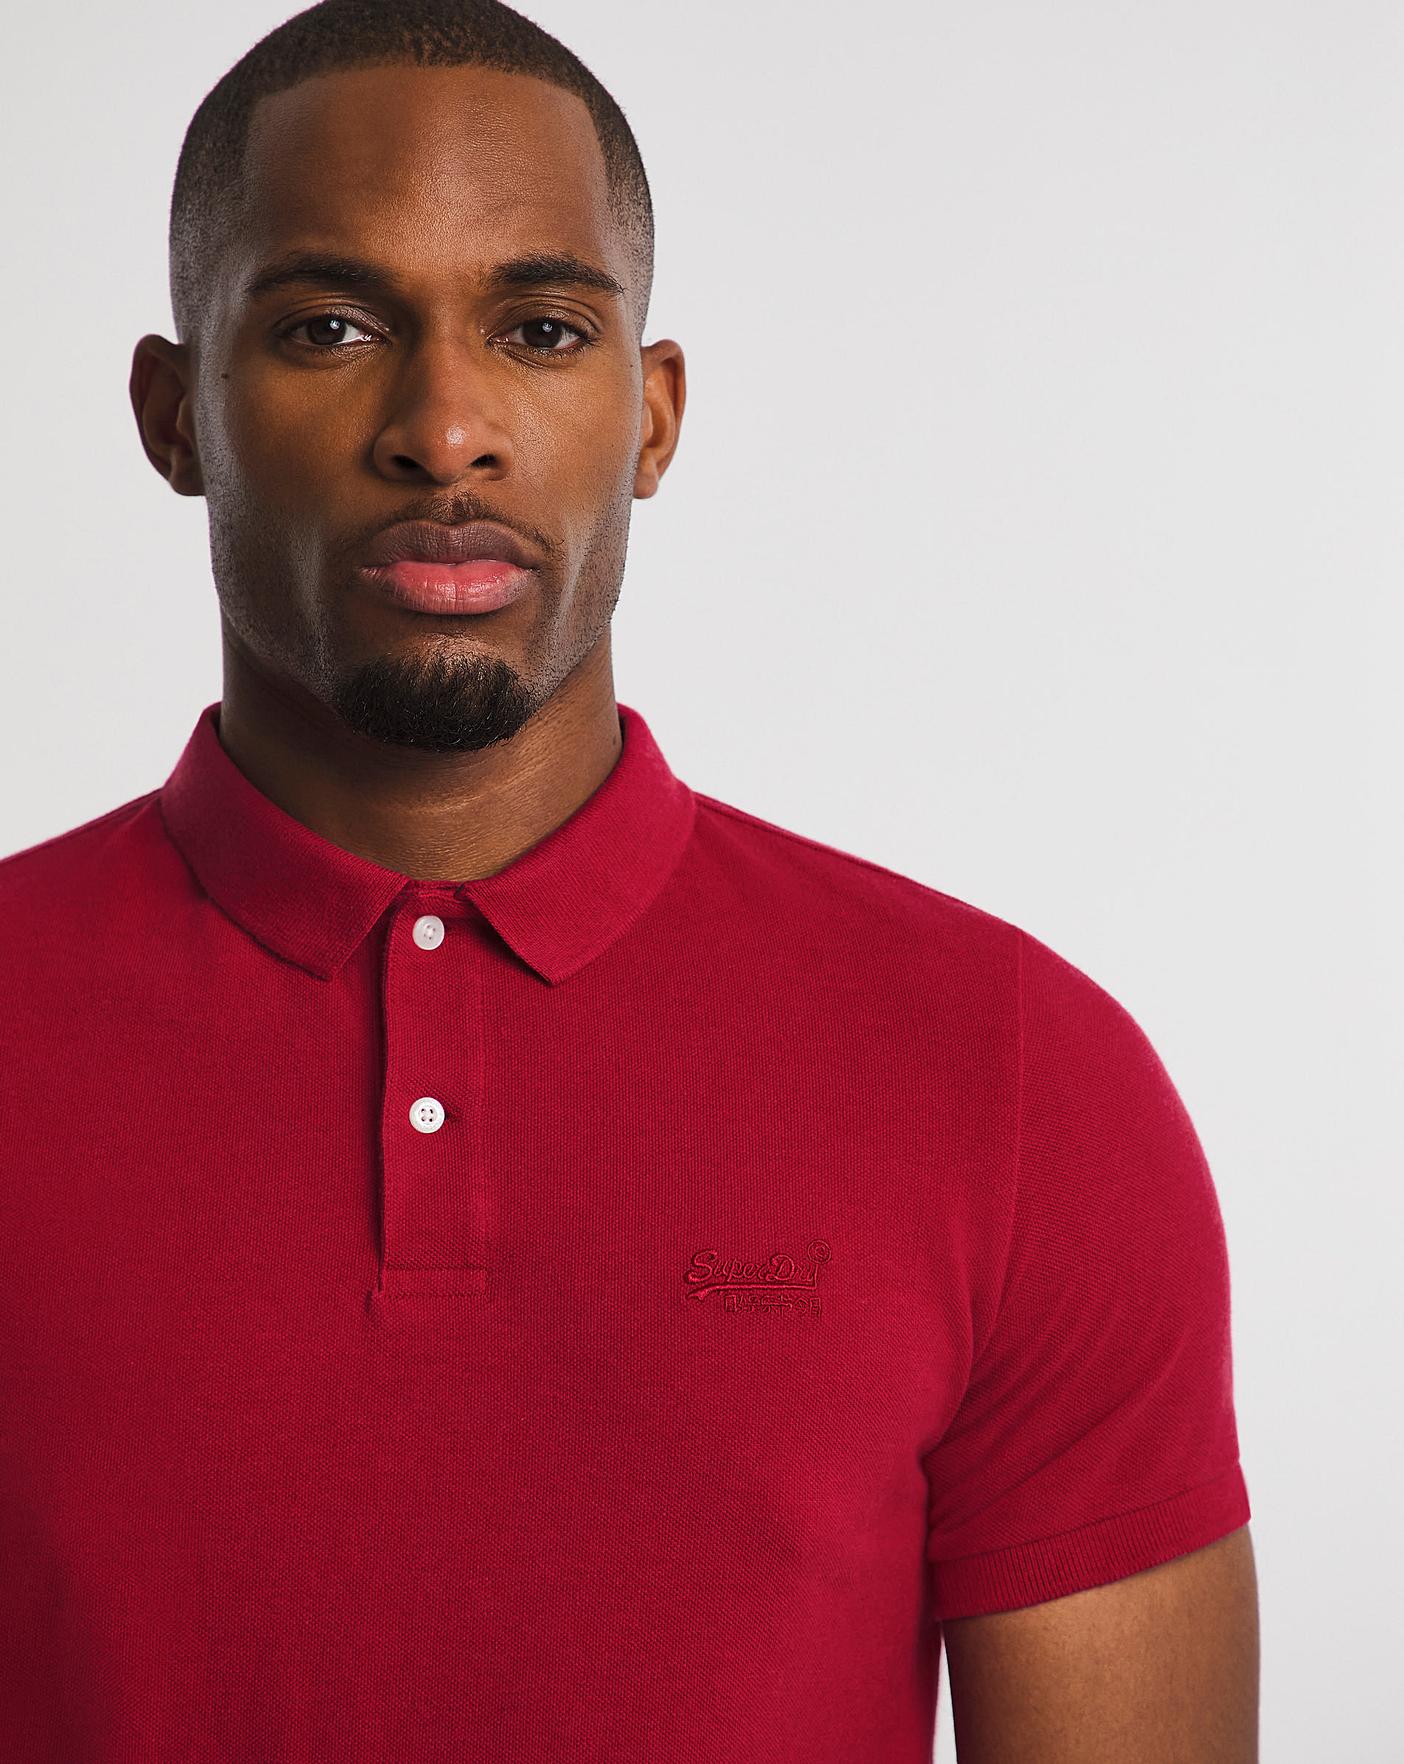 Superdry Hiker Red Marl Classic Short Sleeve Pique Polo